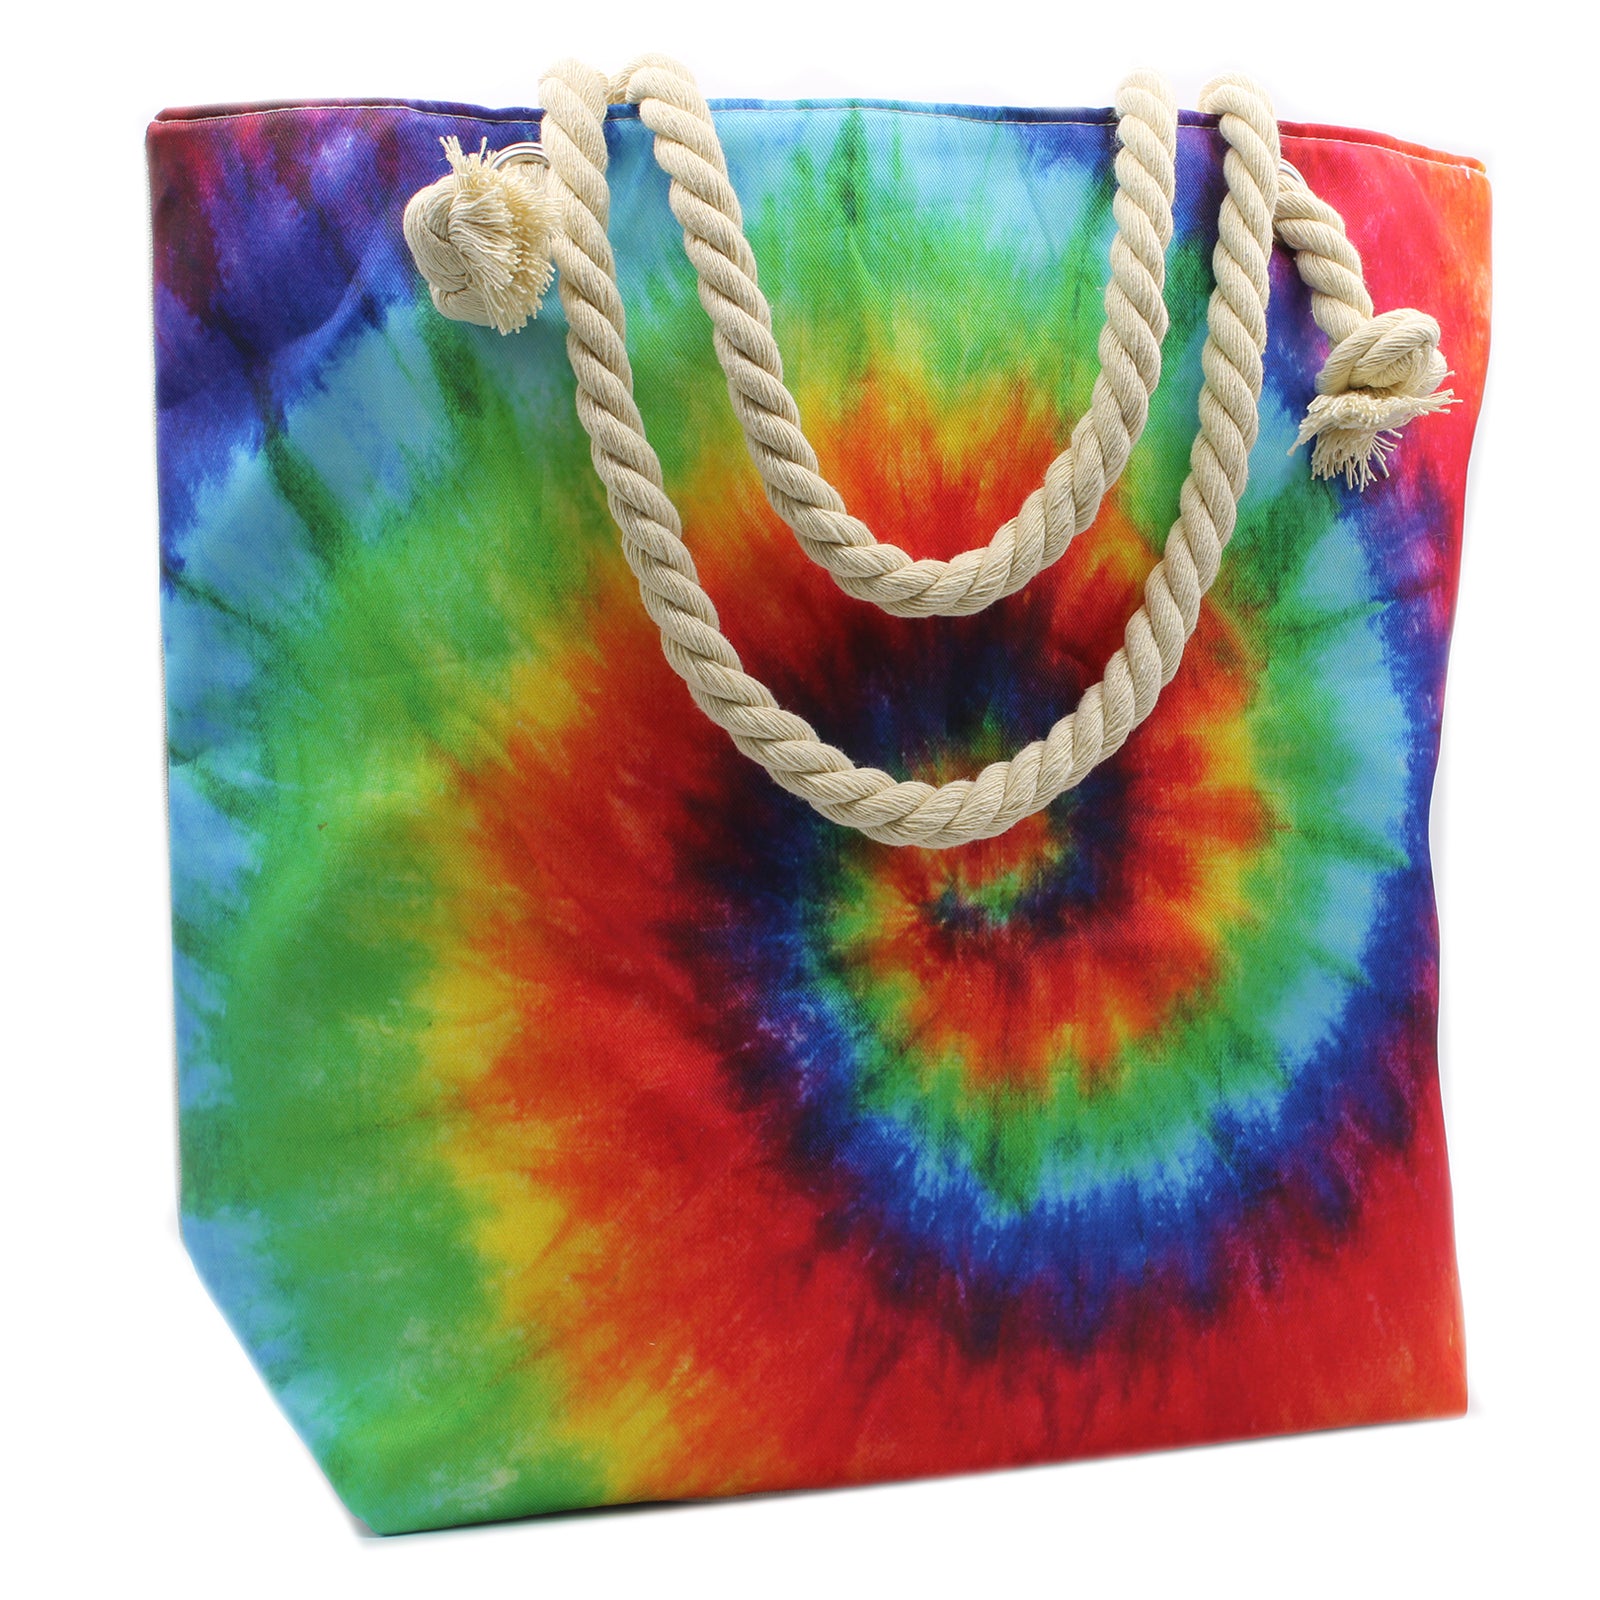 View Psychedelic Splash Bag Pure Energy information